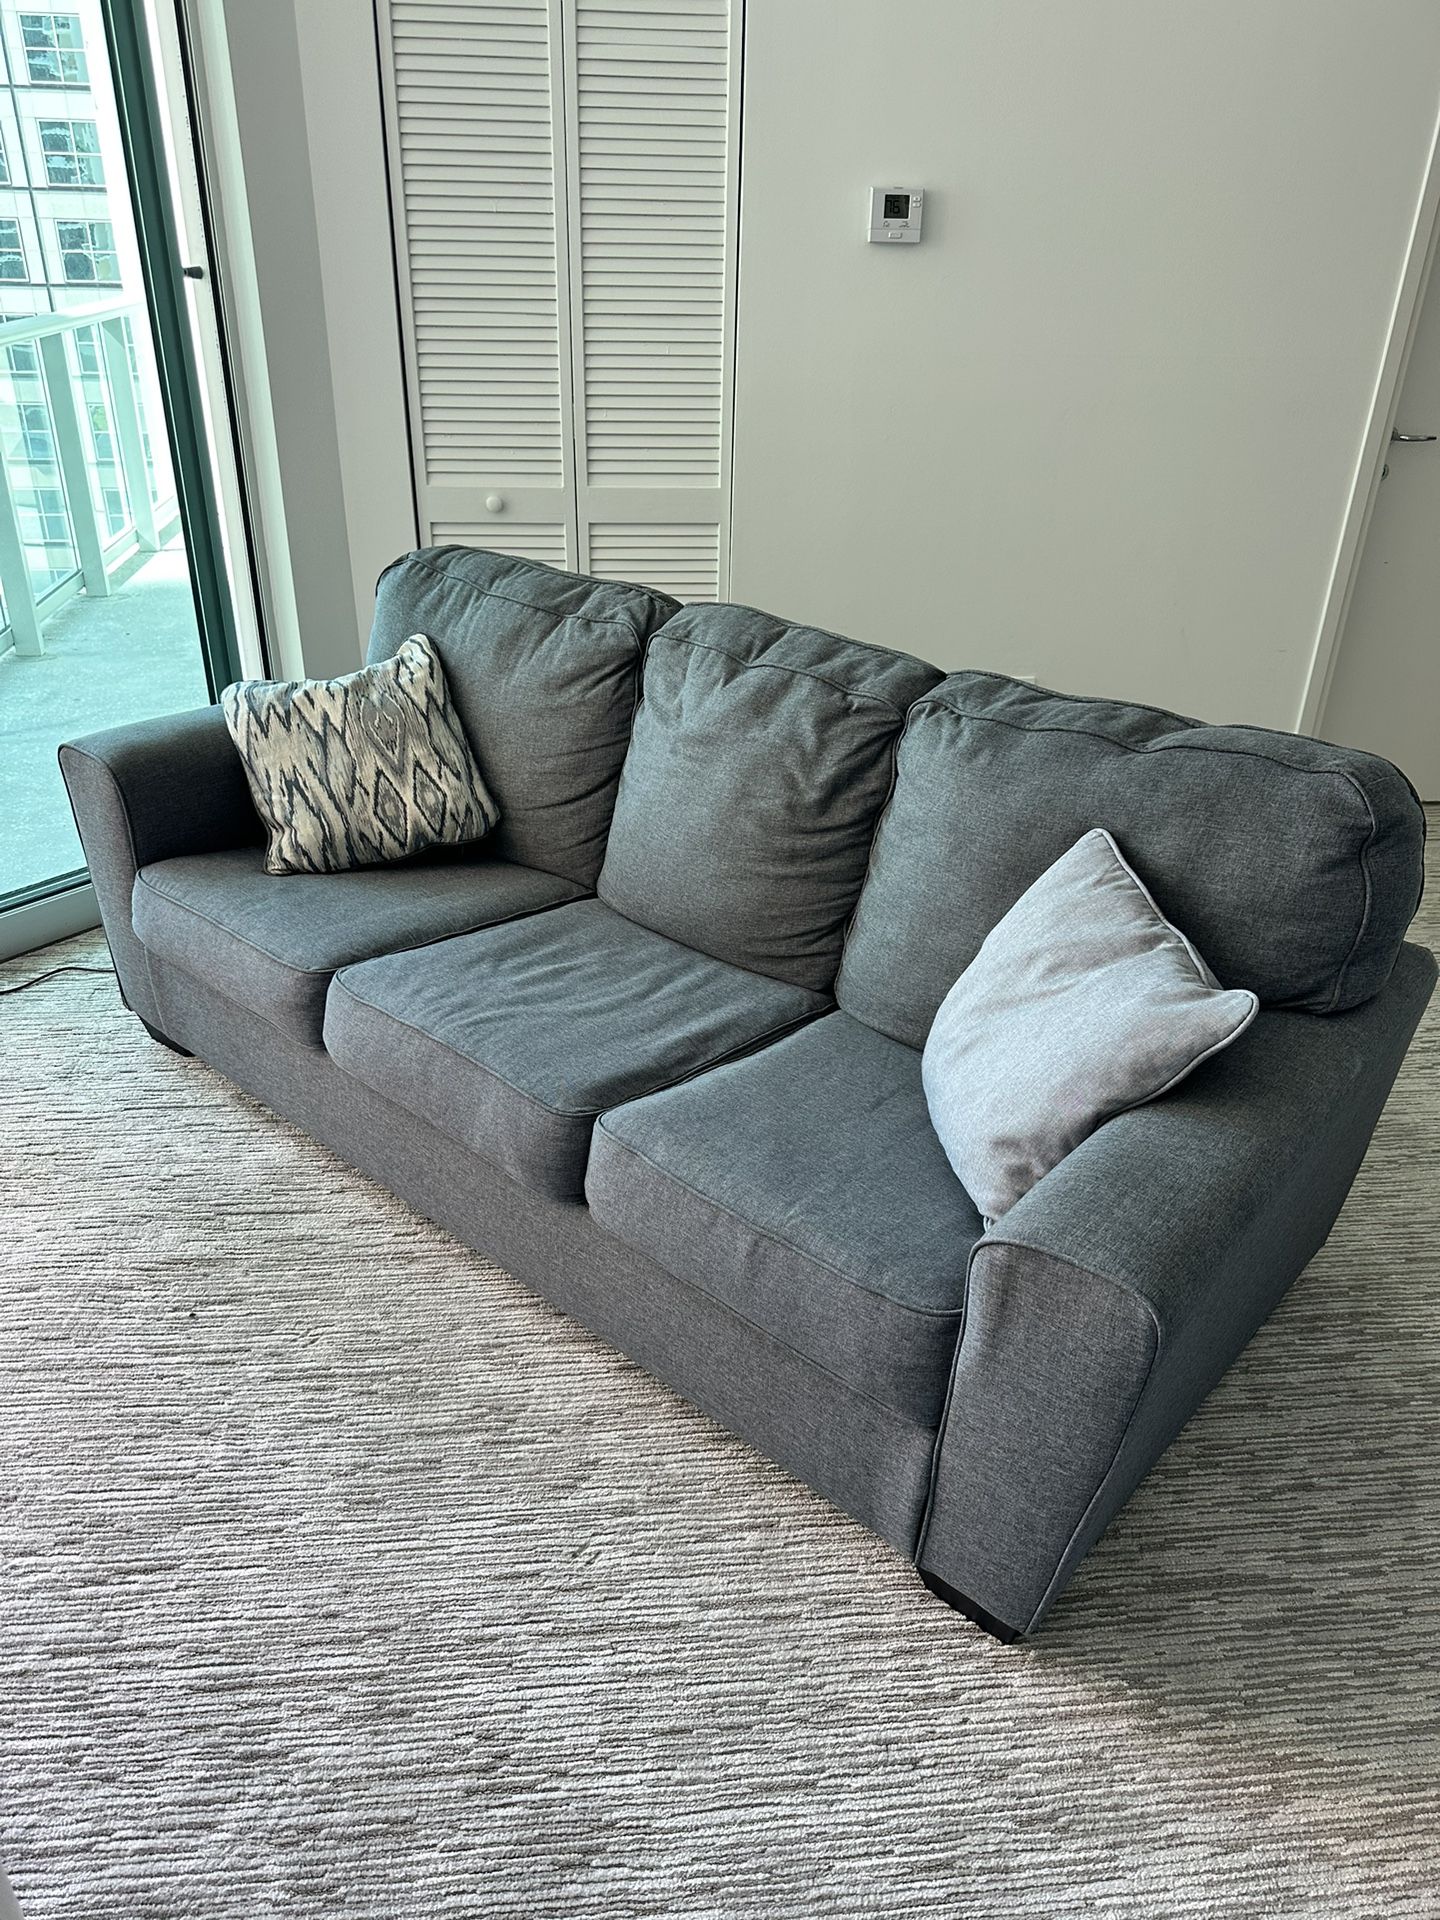 Folding Sofa. Couch With Pillows. Like New